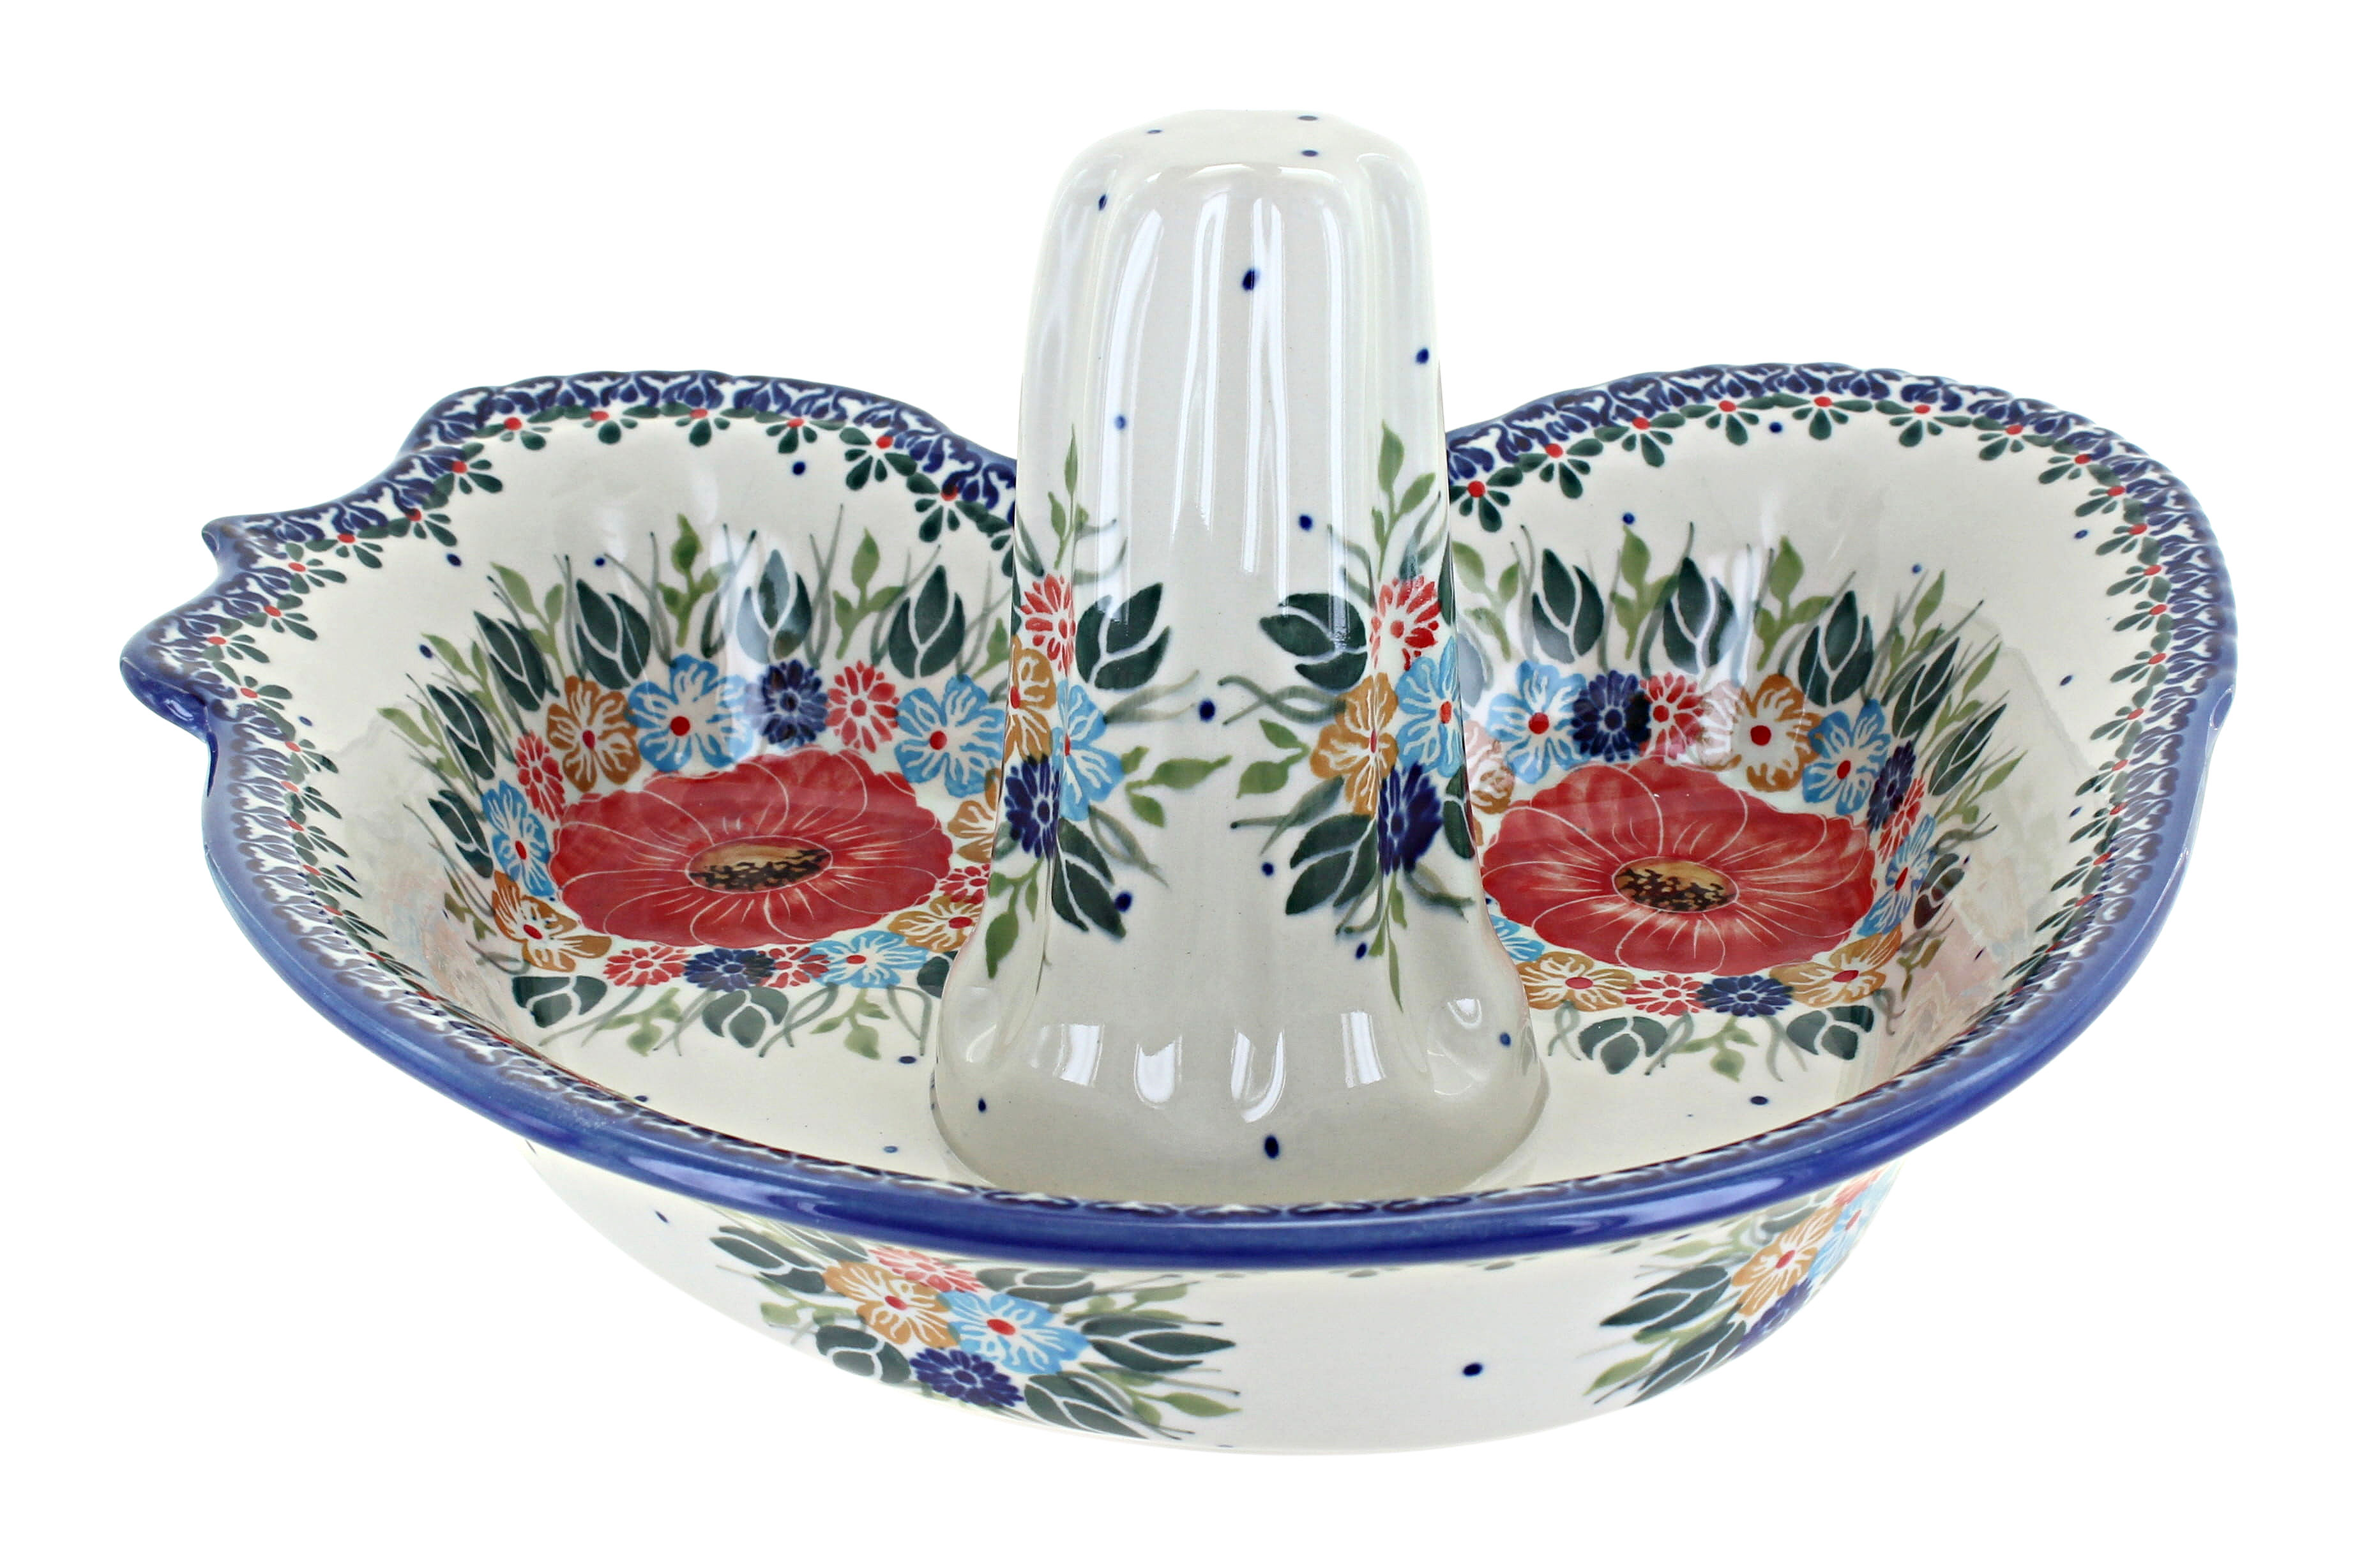 11 Muffin Pan - Blue Spring — Polish Pottery House